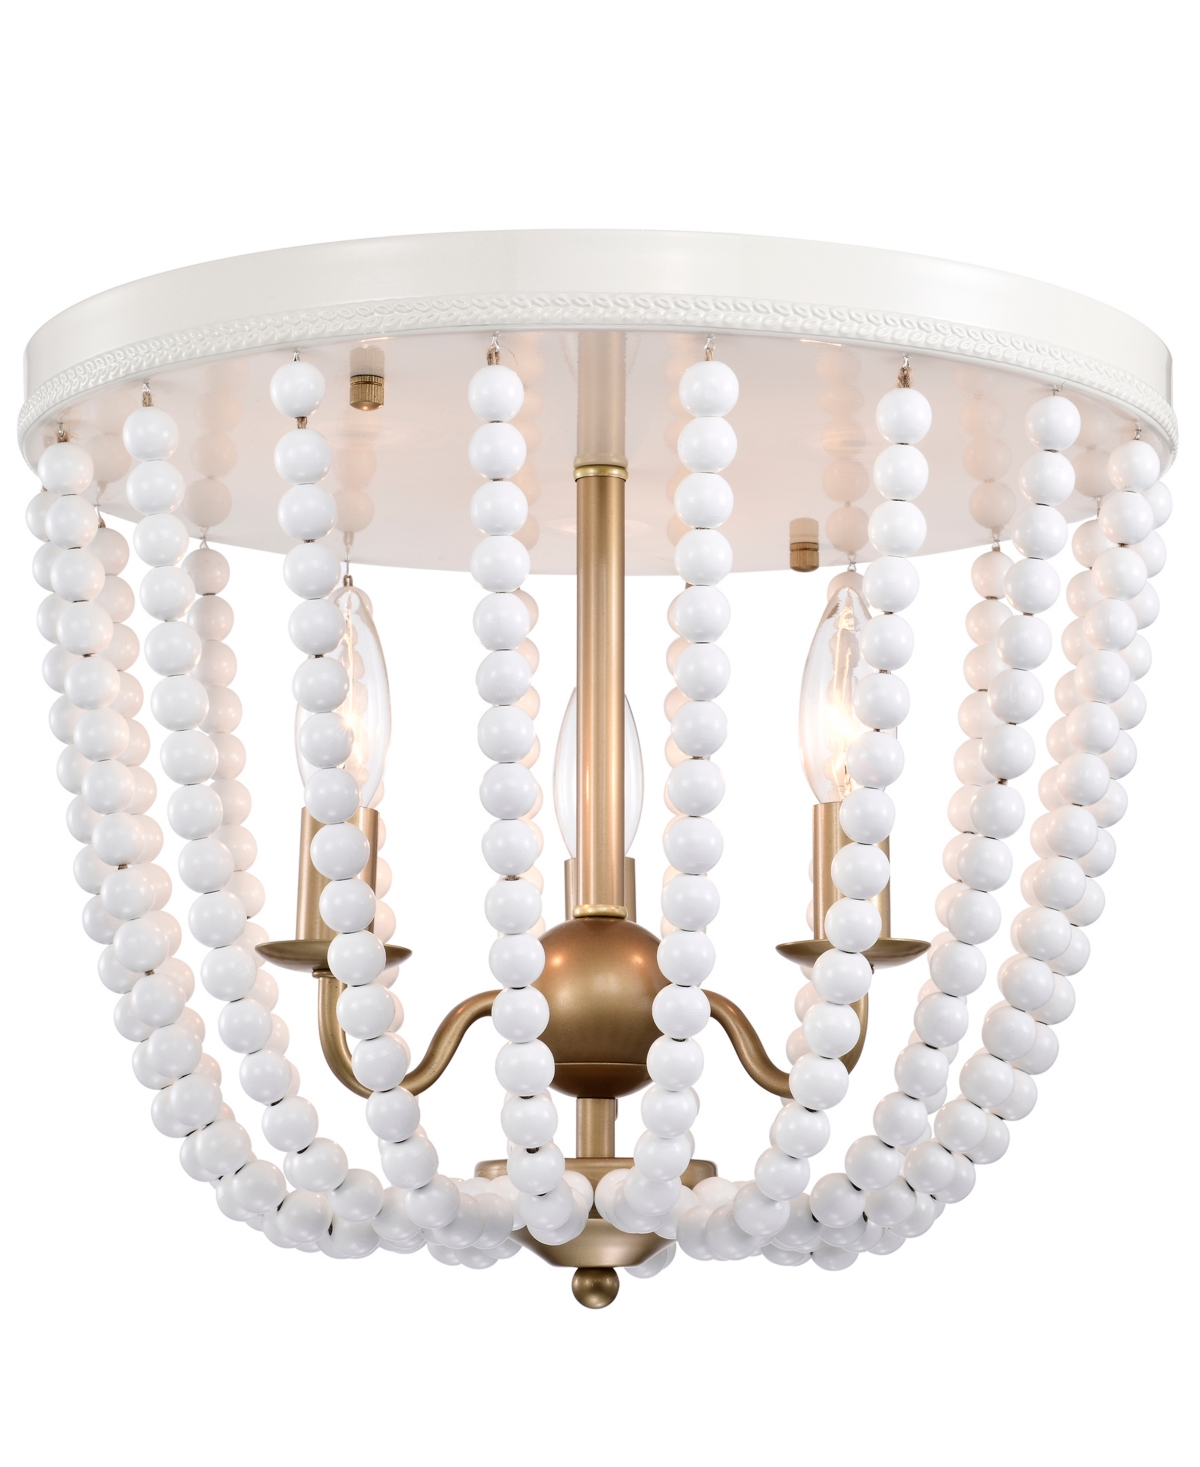 Home Accessories Taha 15" Indoor Finish Flush Mount Ceiling Light With Light Kit In Gloss White And Brass